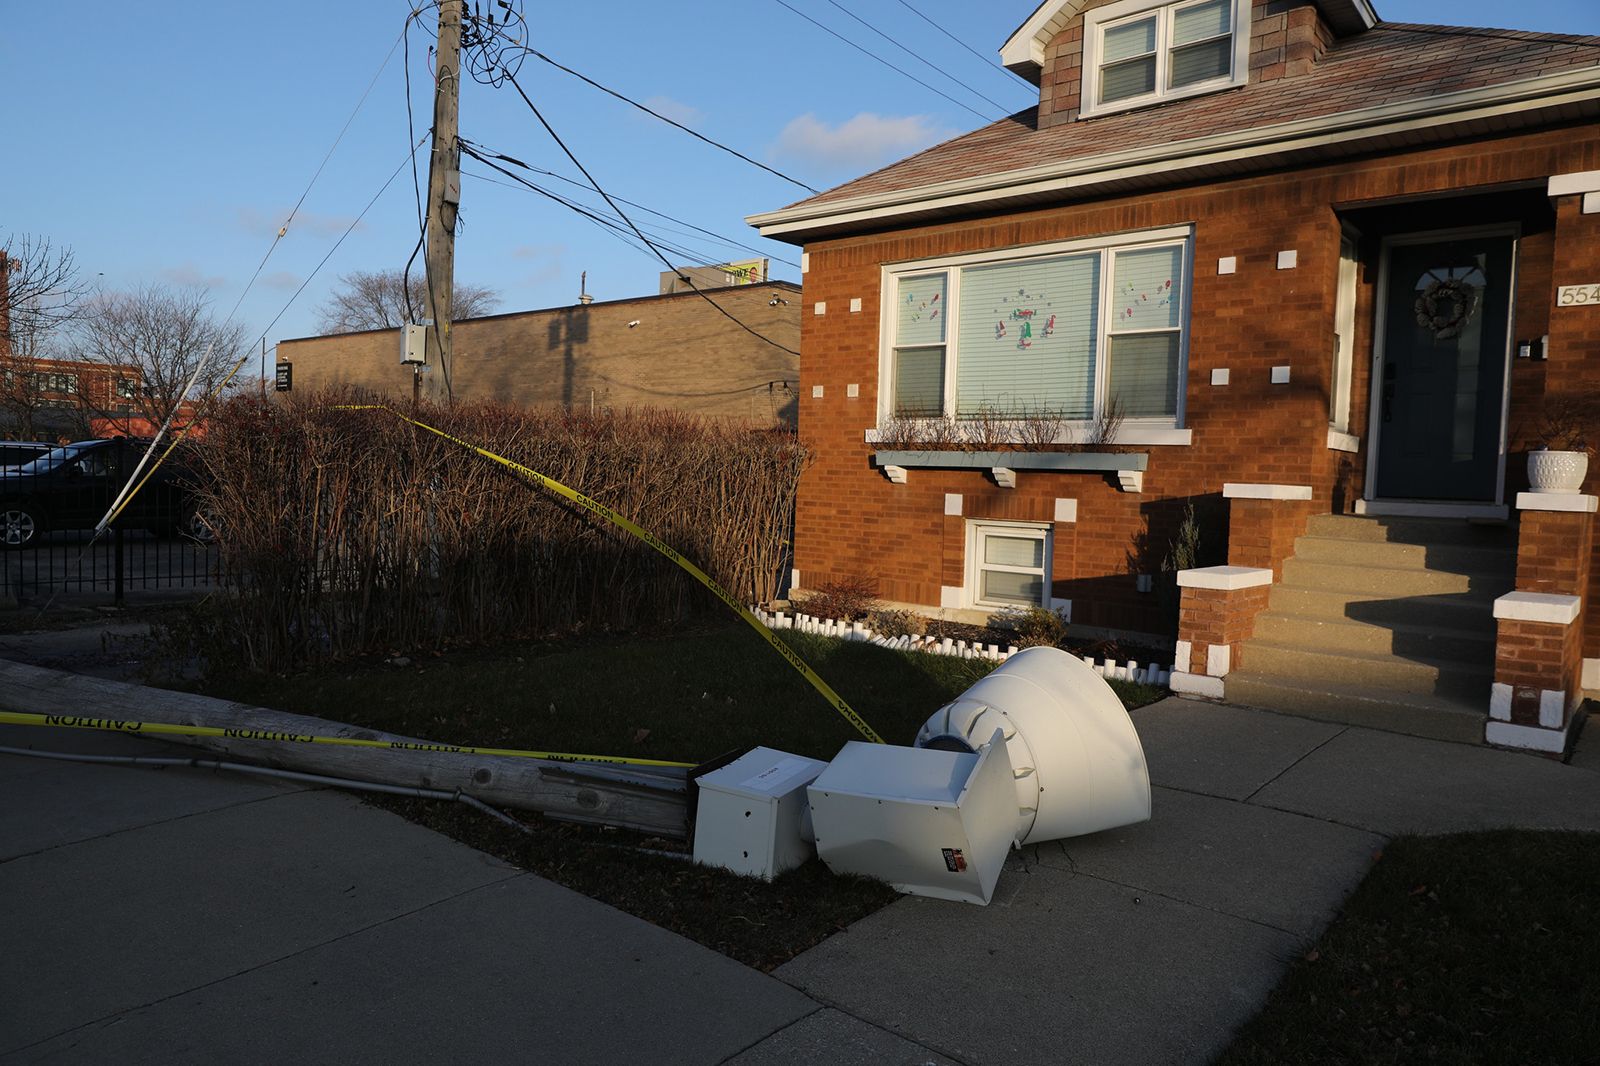 Photo of a utility pole crashed onto the ground in front of a house